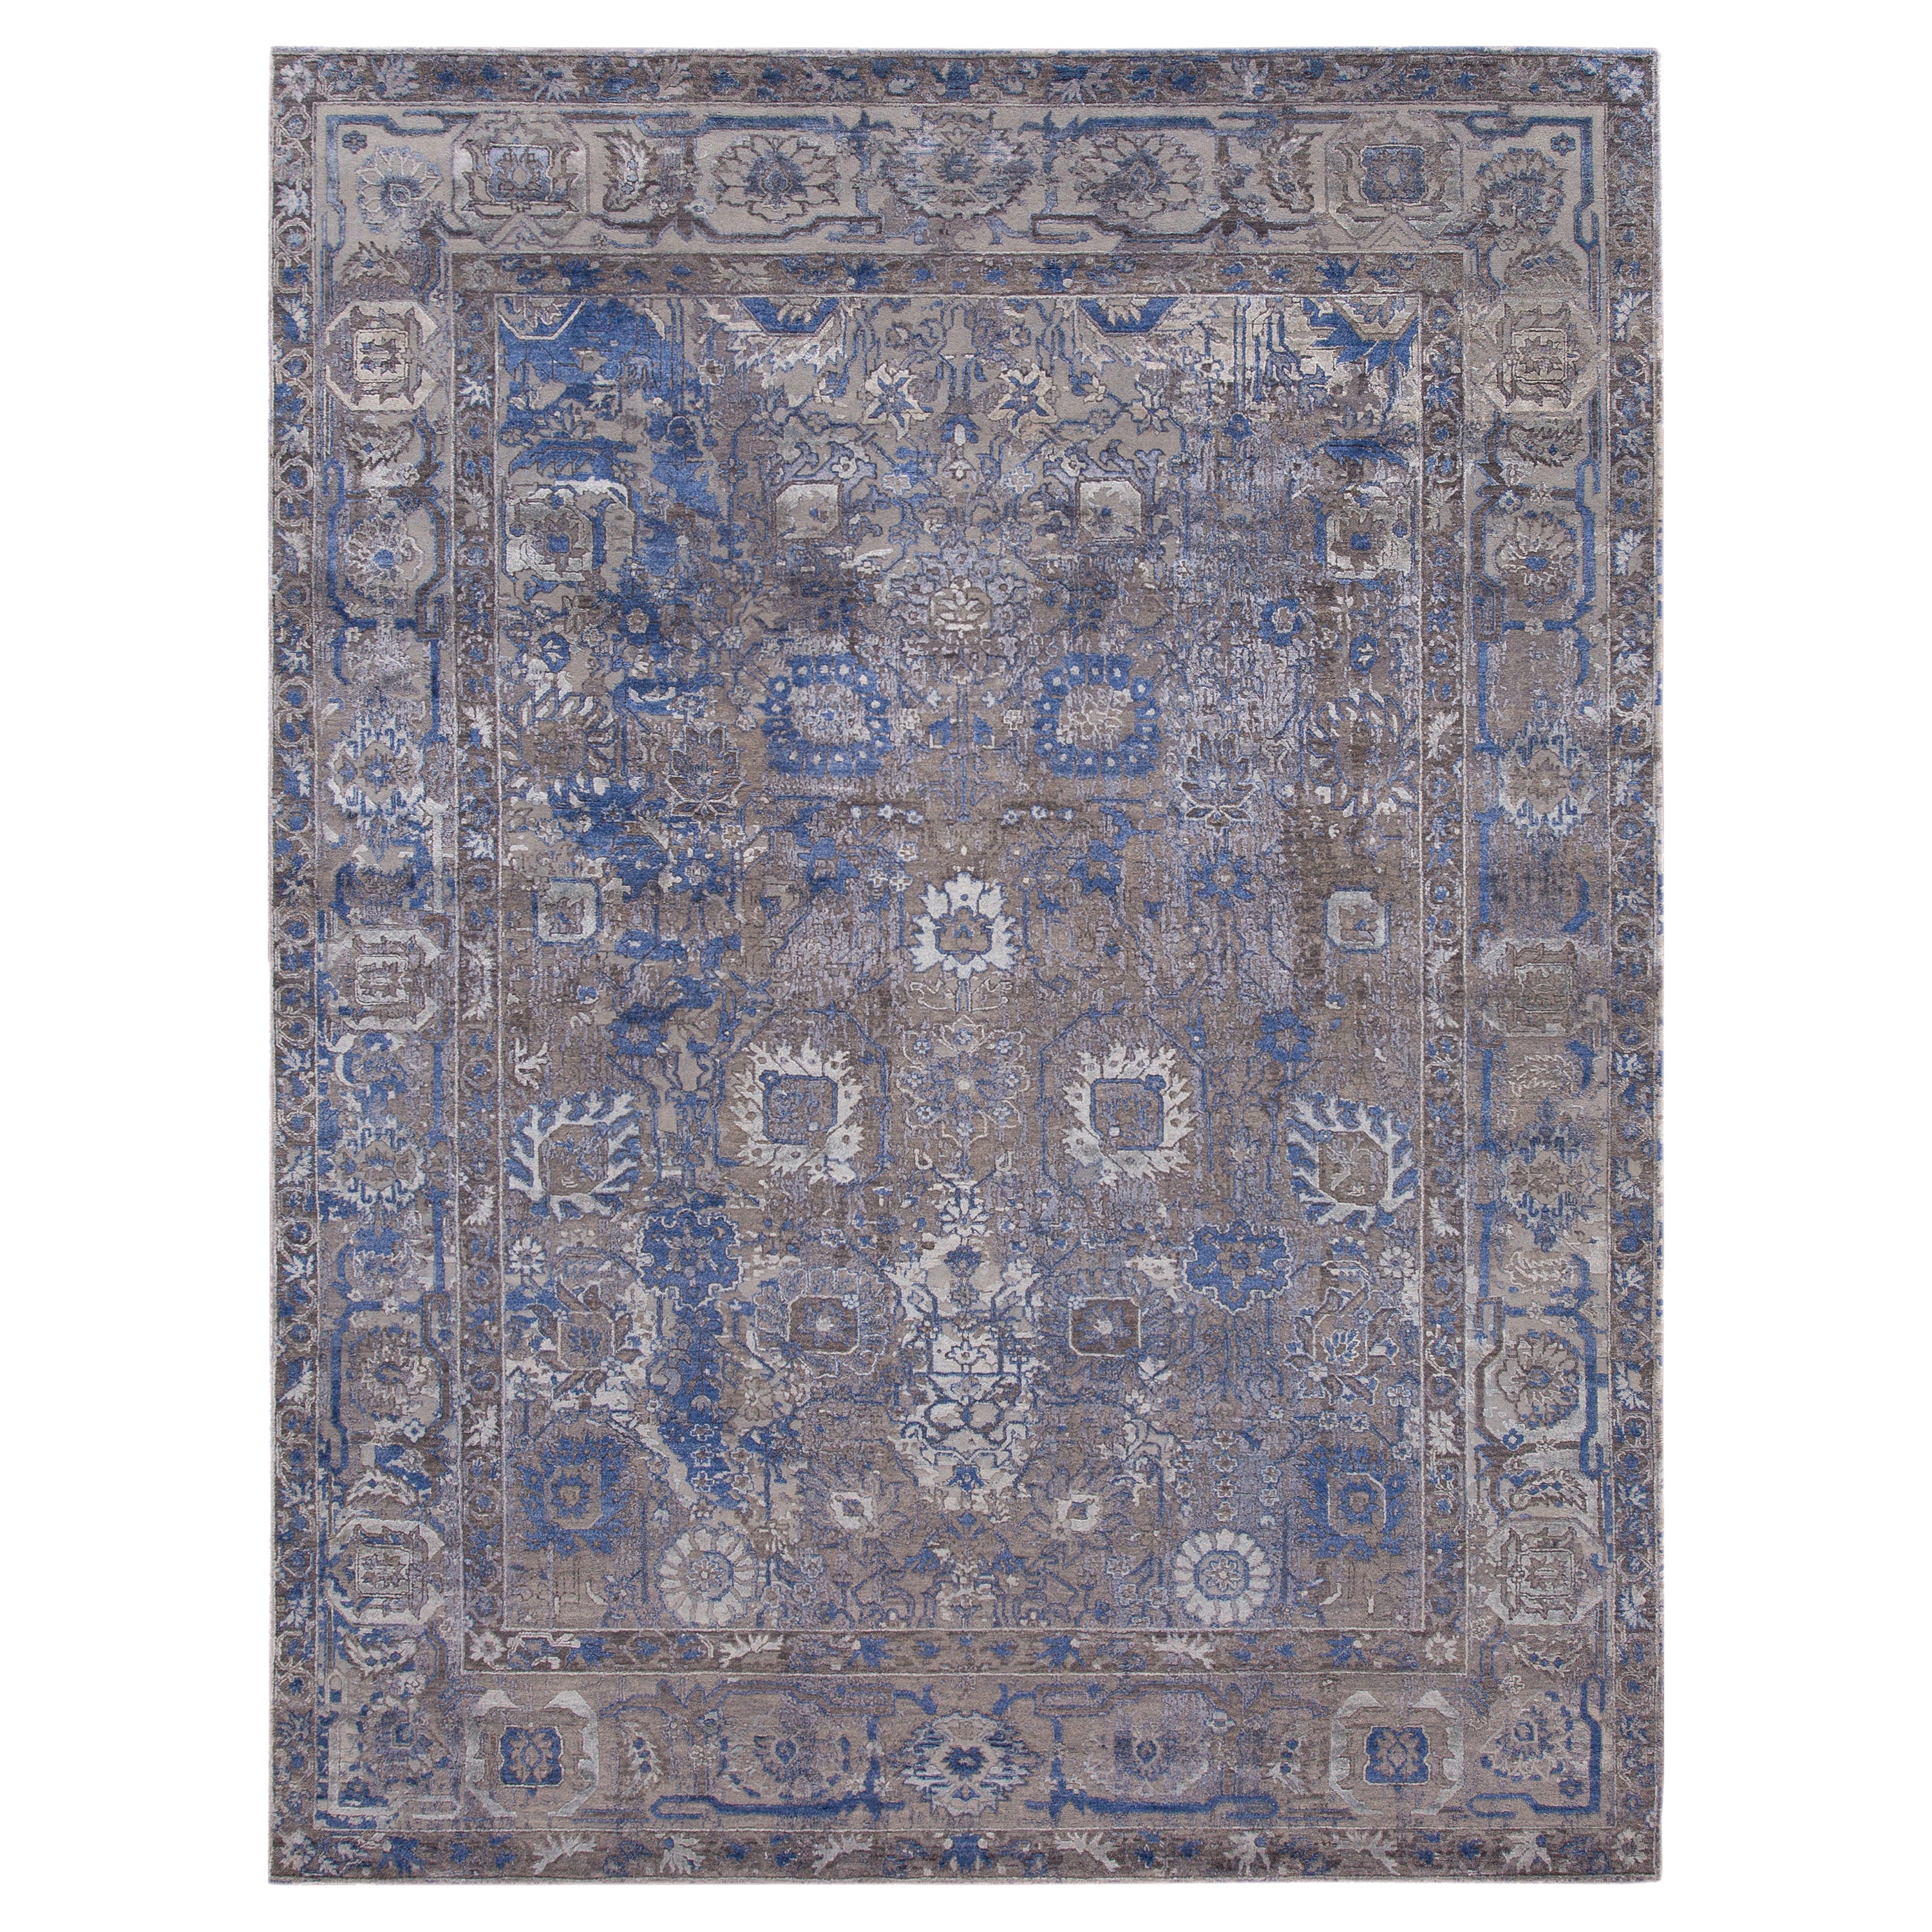 21st Century Mahal Style Wool Rug With Gray And Blue Design For Sale